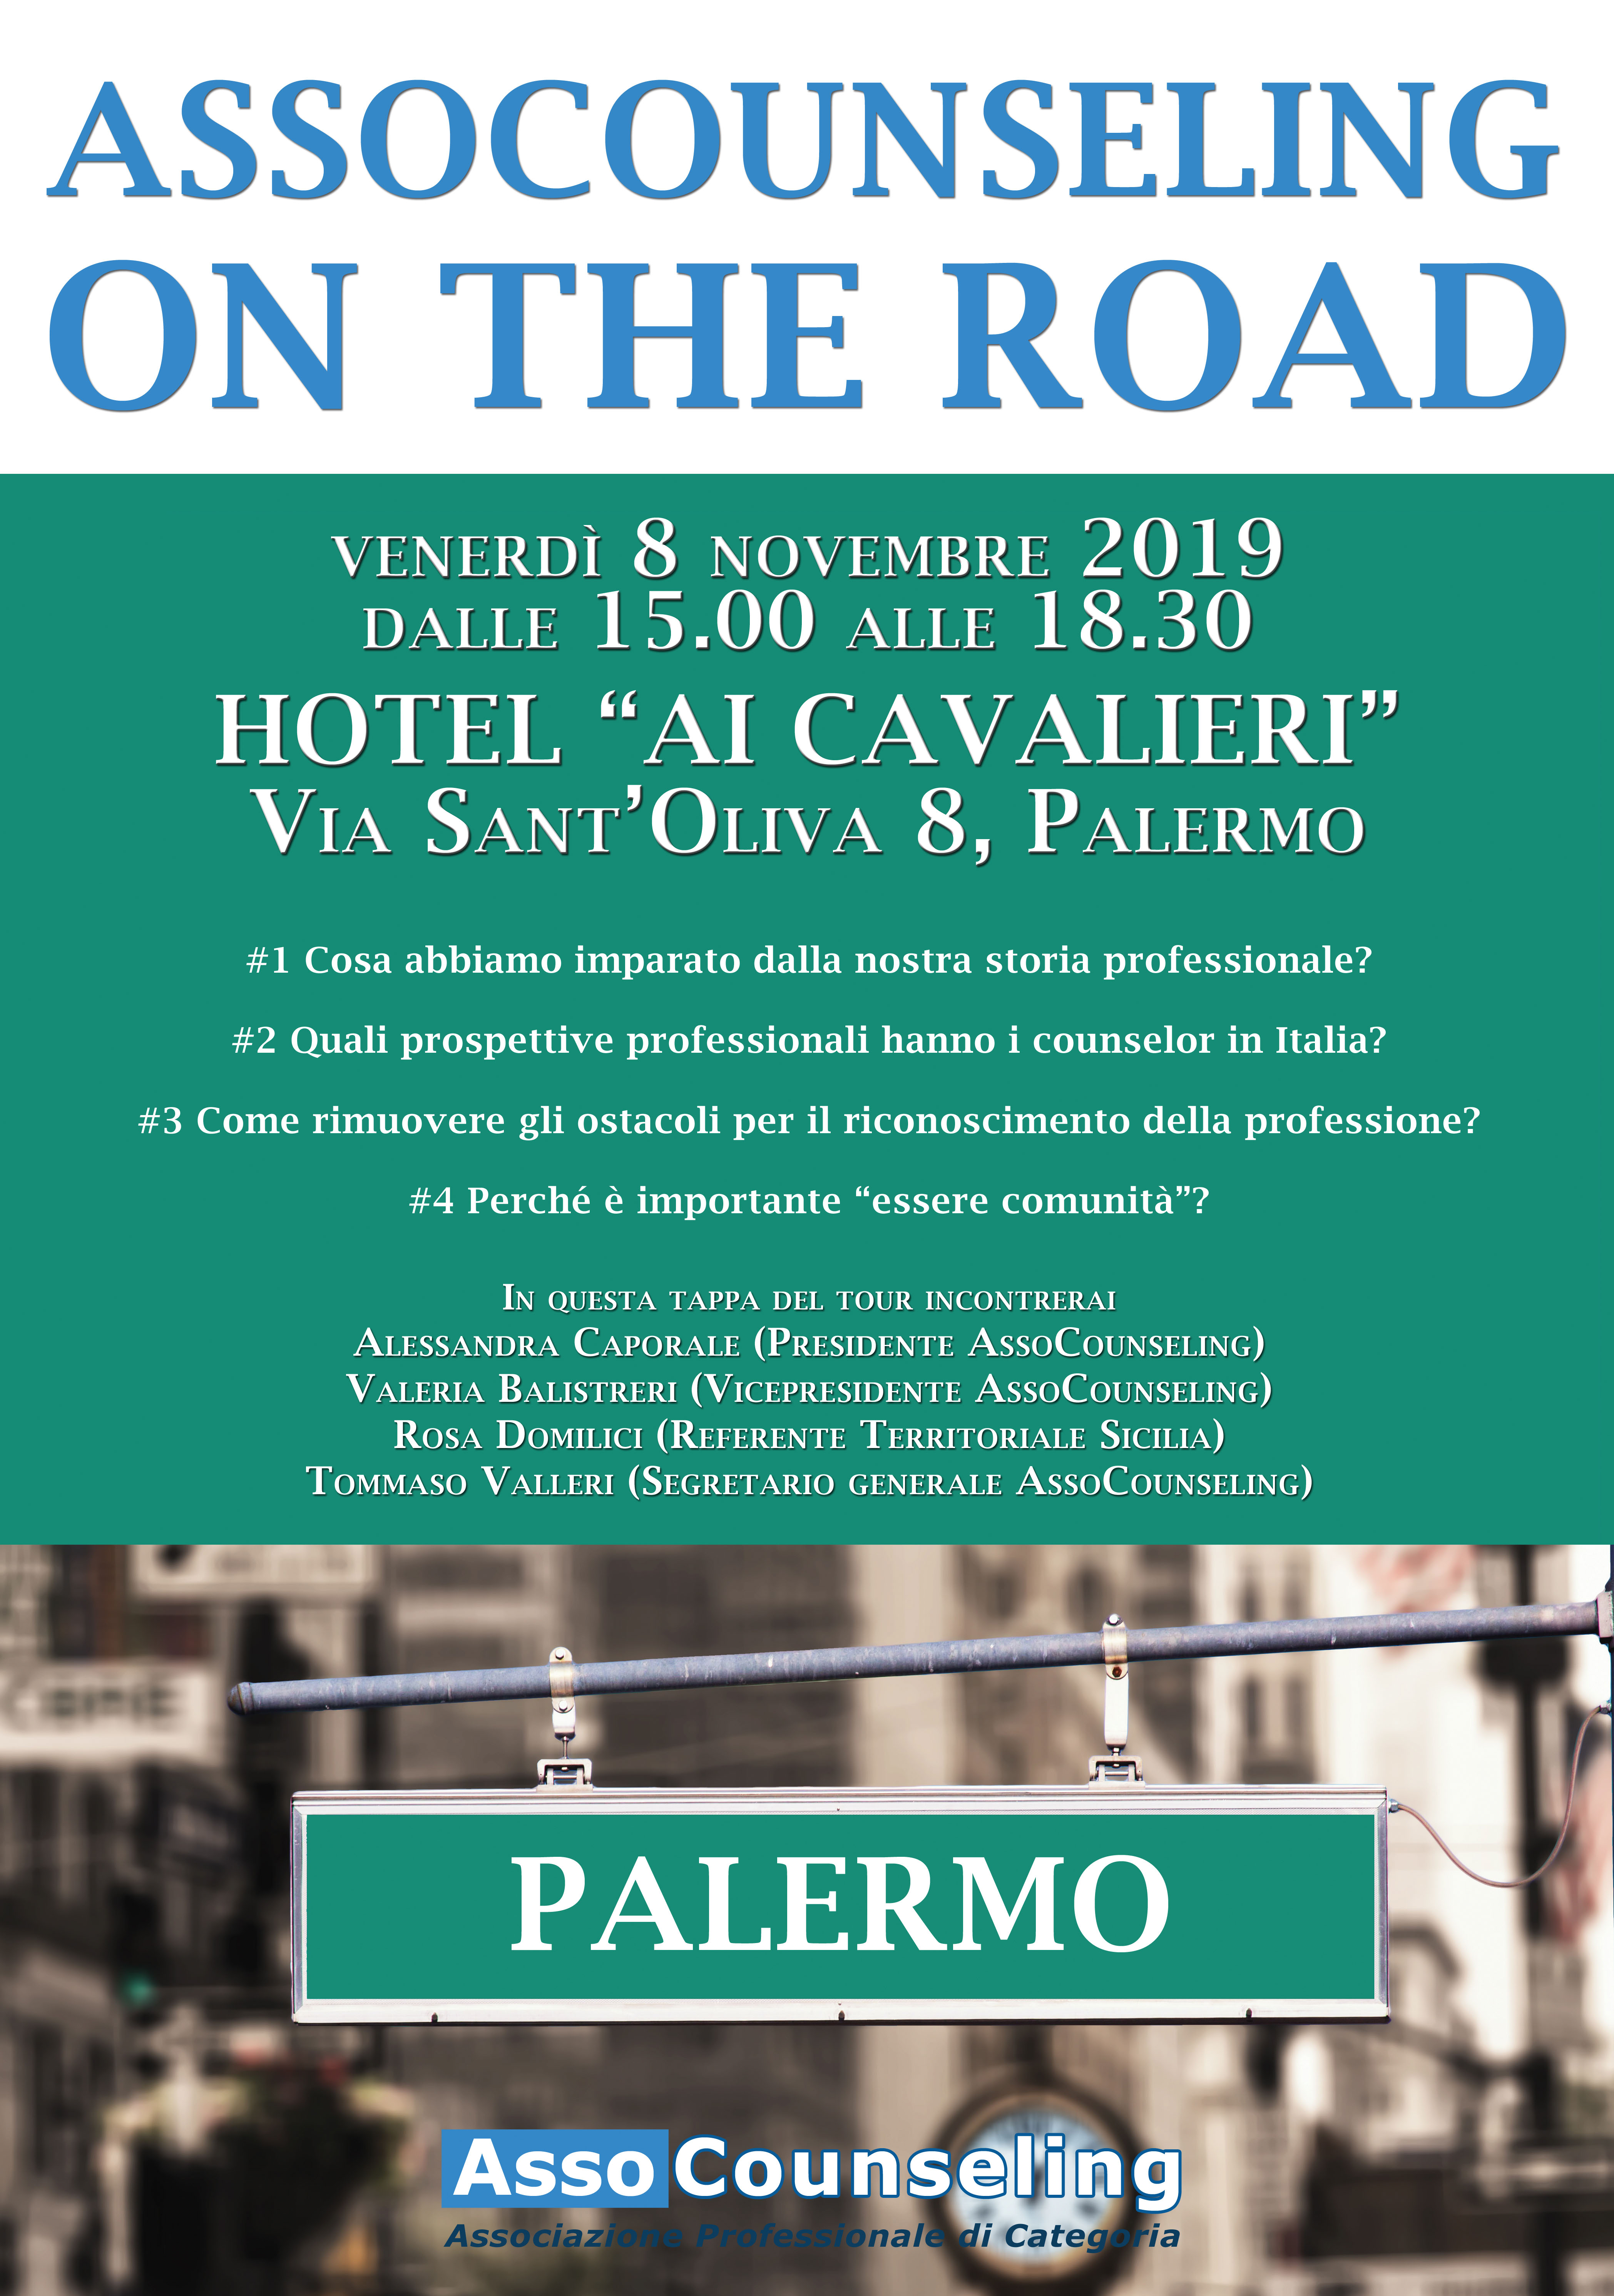 AssoCounseling on the road - Palermo